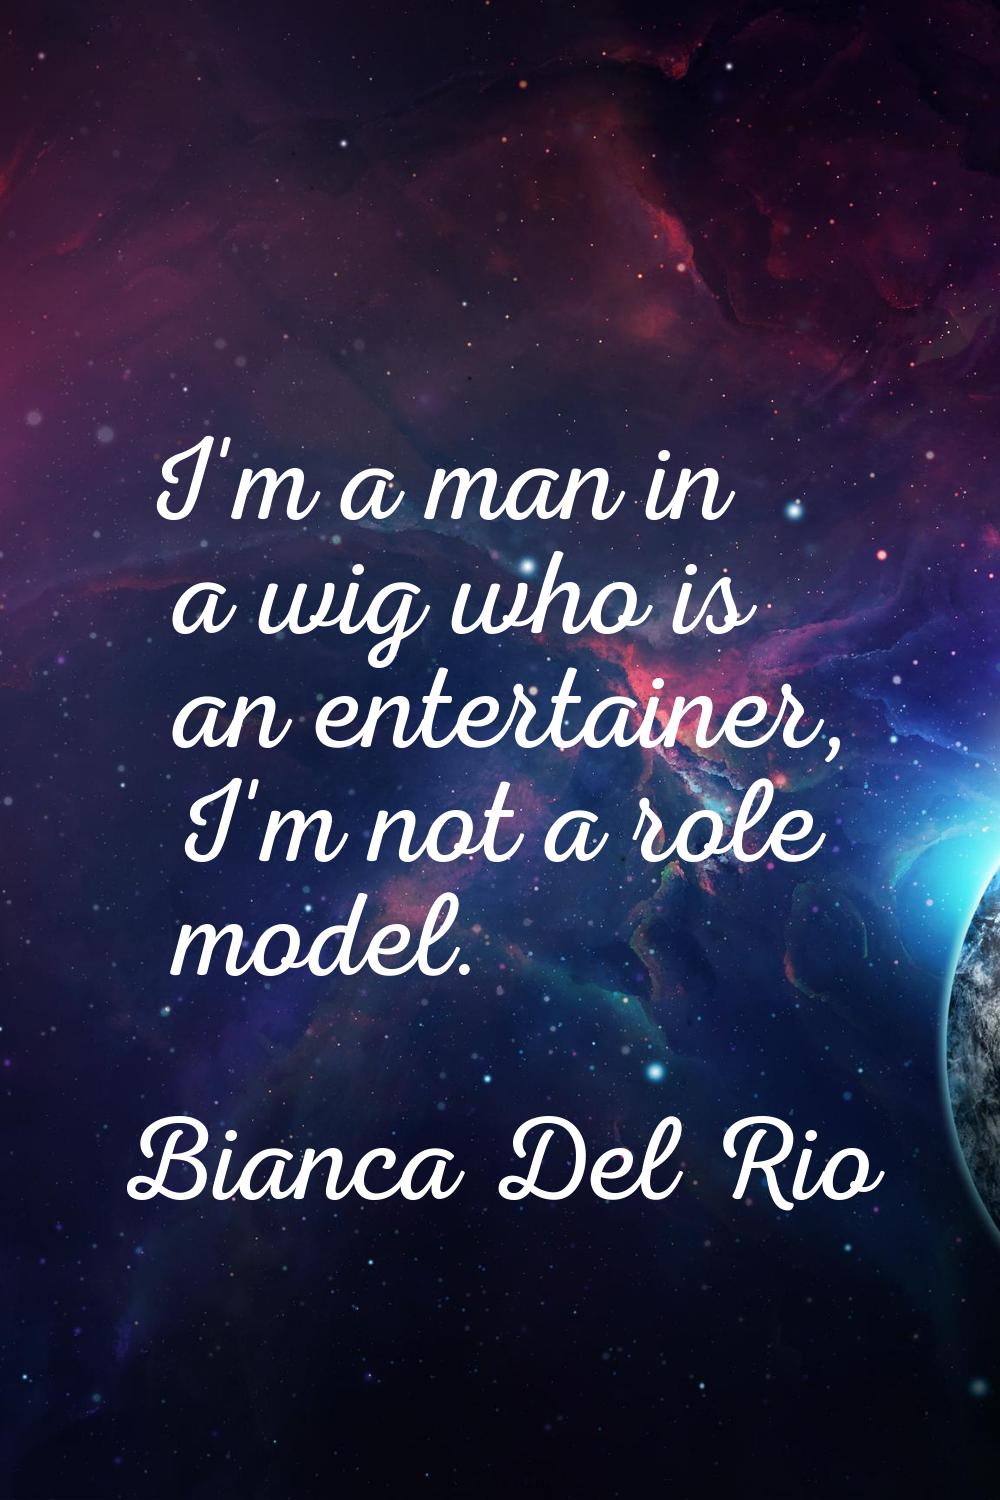 I'm a man in a wig who is an entertainer, I'm not a role model.